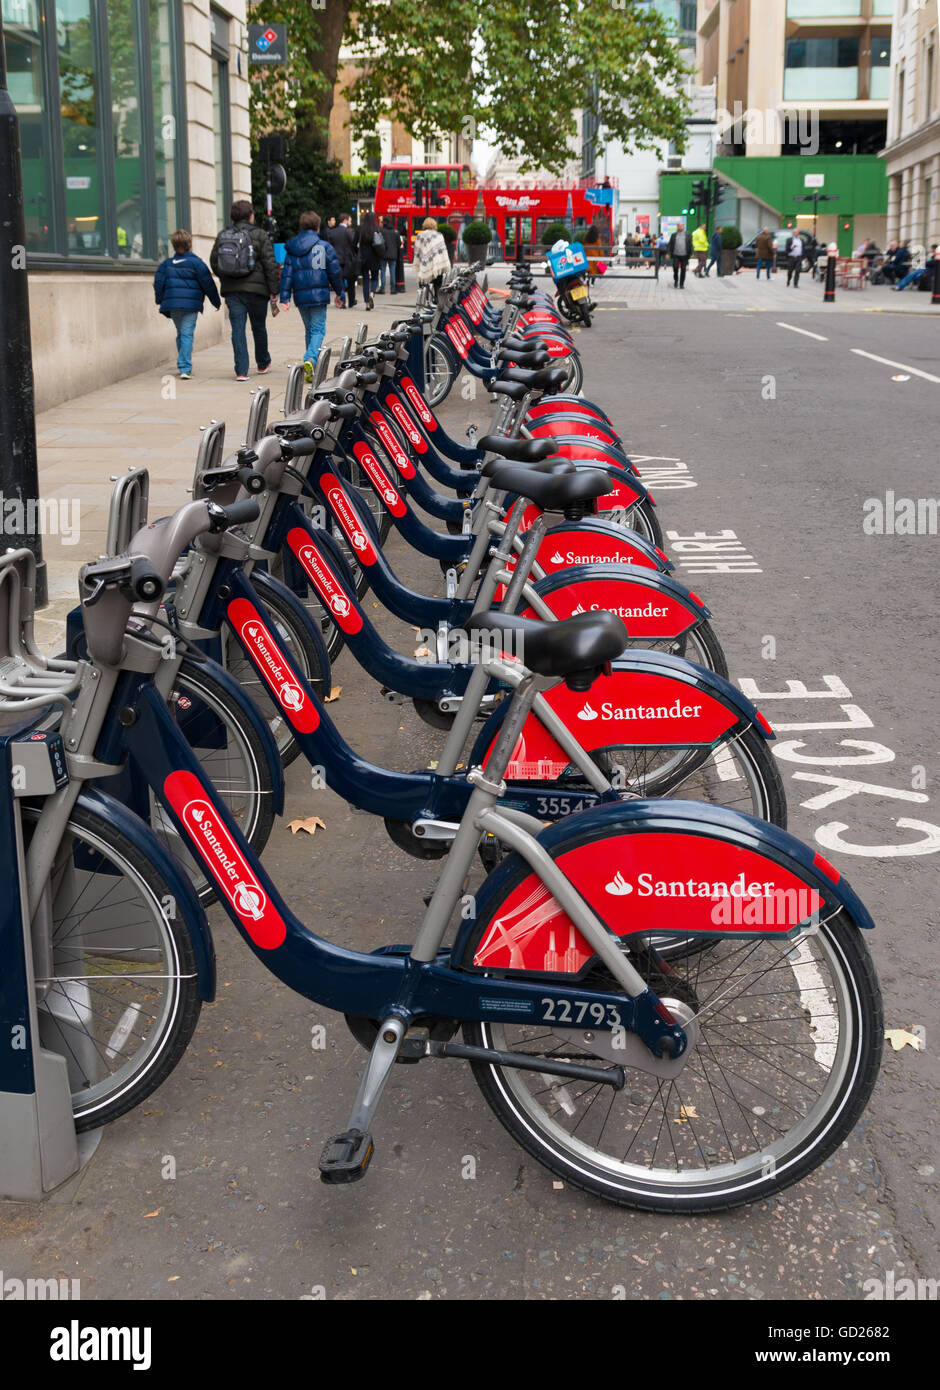 LONDON, ENGLAND - OCTOBER 23: Santander rental bikes for hire in London. These cycles can be rented at a series of locations aro Stock Photo